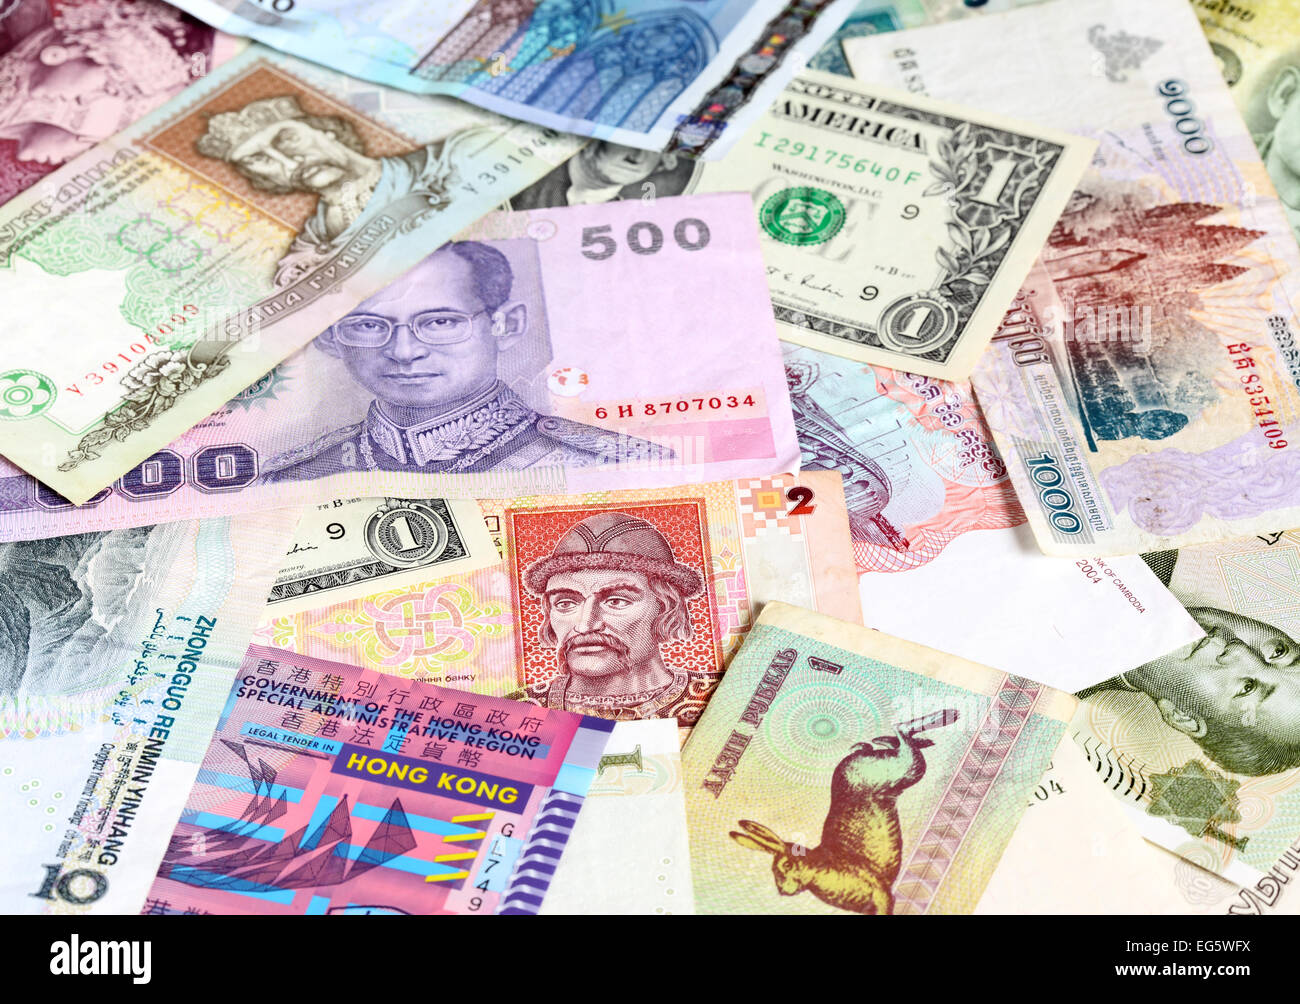 Money background - Various banknotes close-up Stock Photo